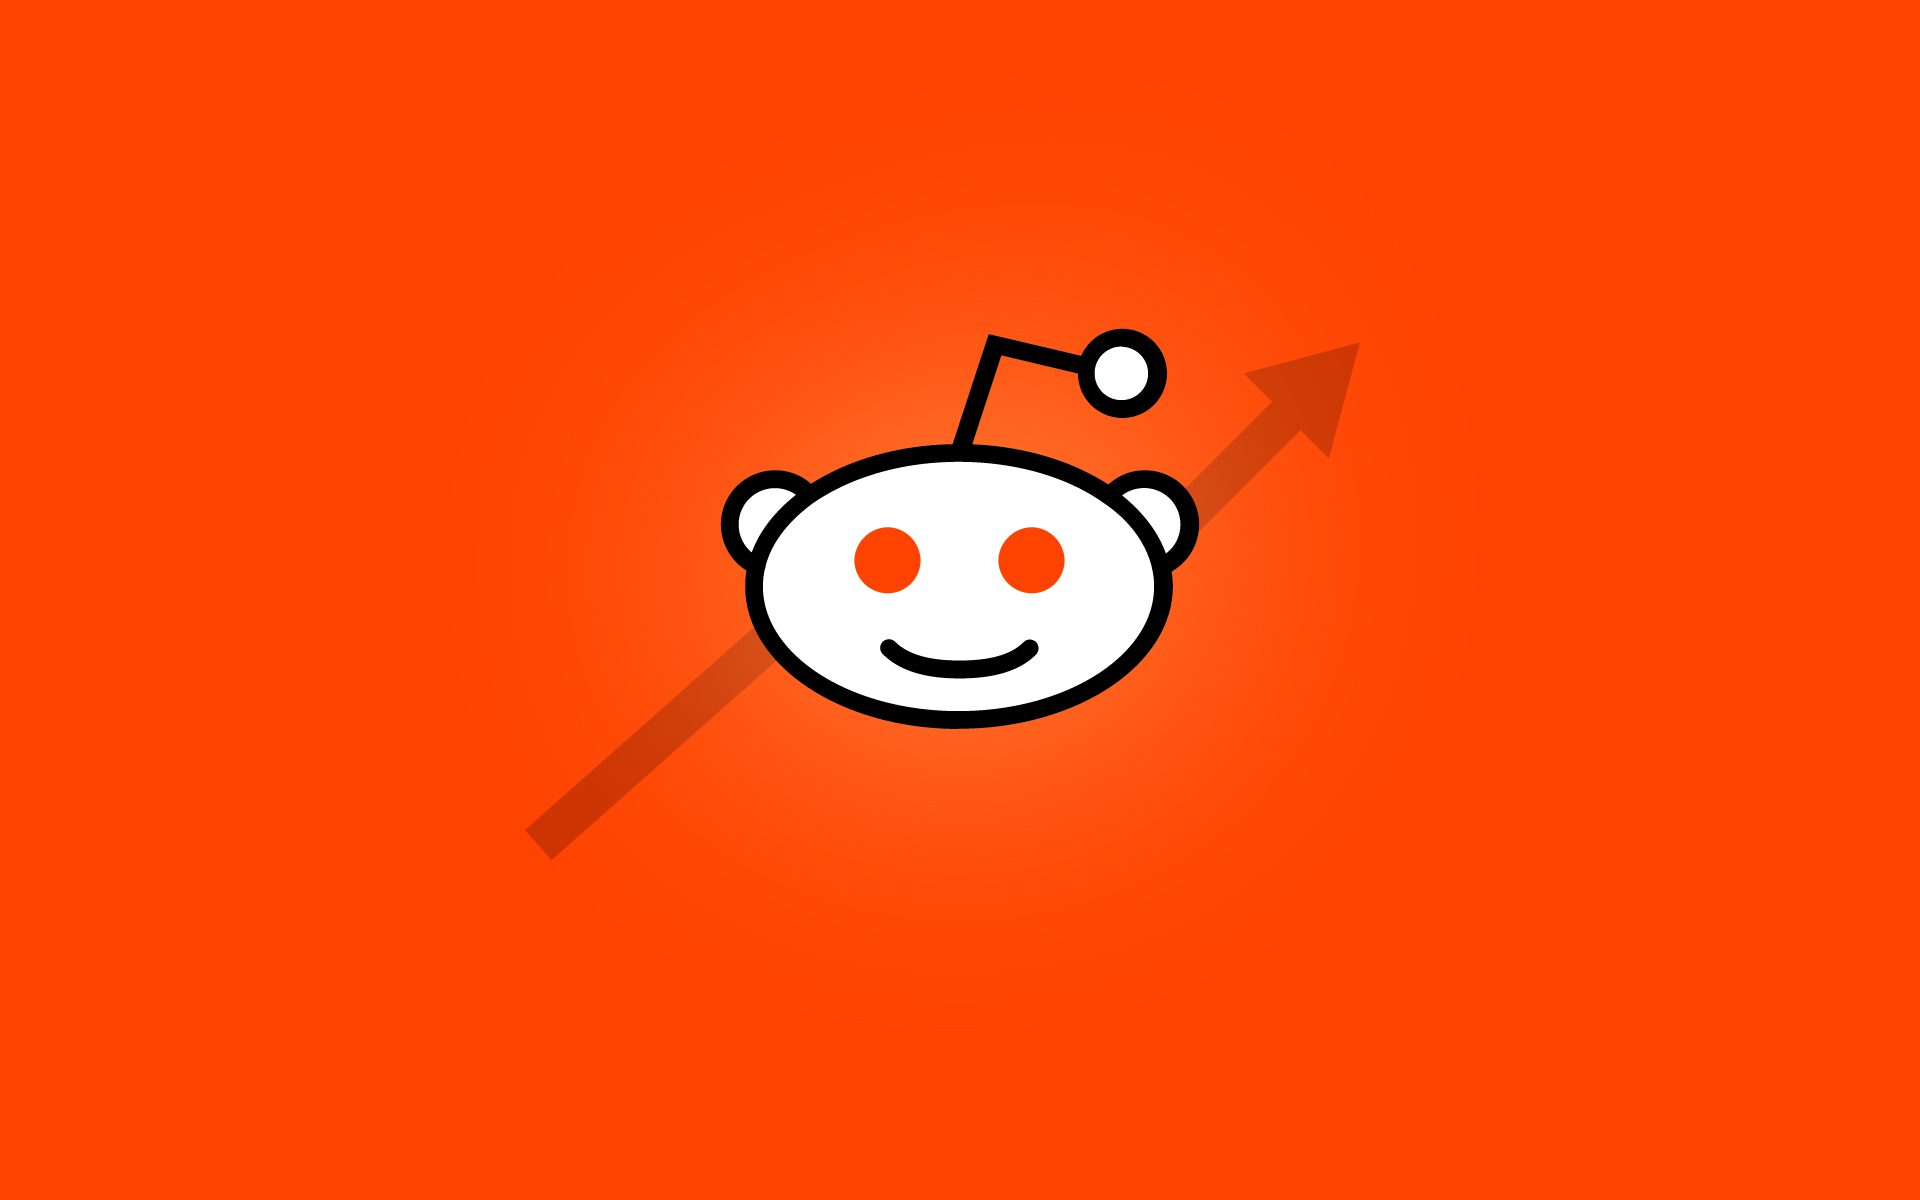 Dive into Reddit for performance